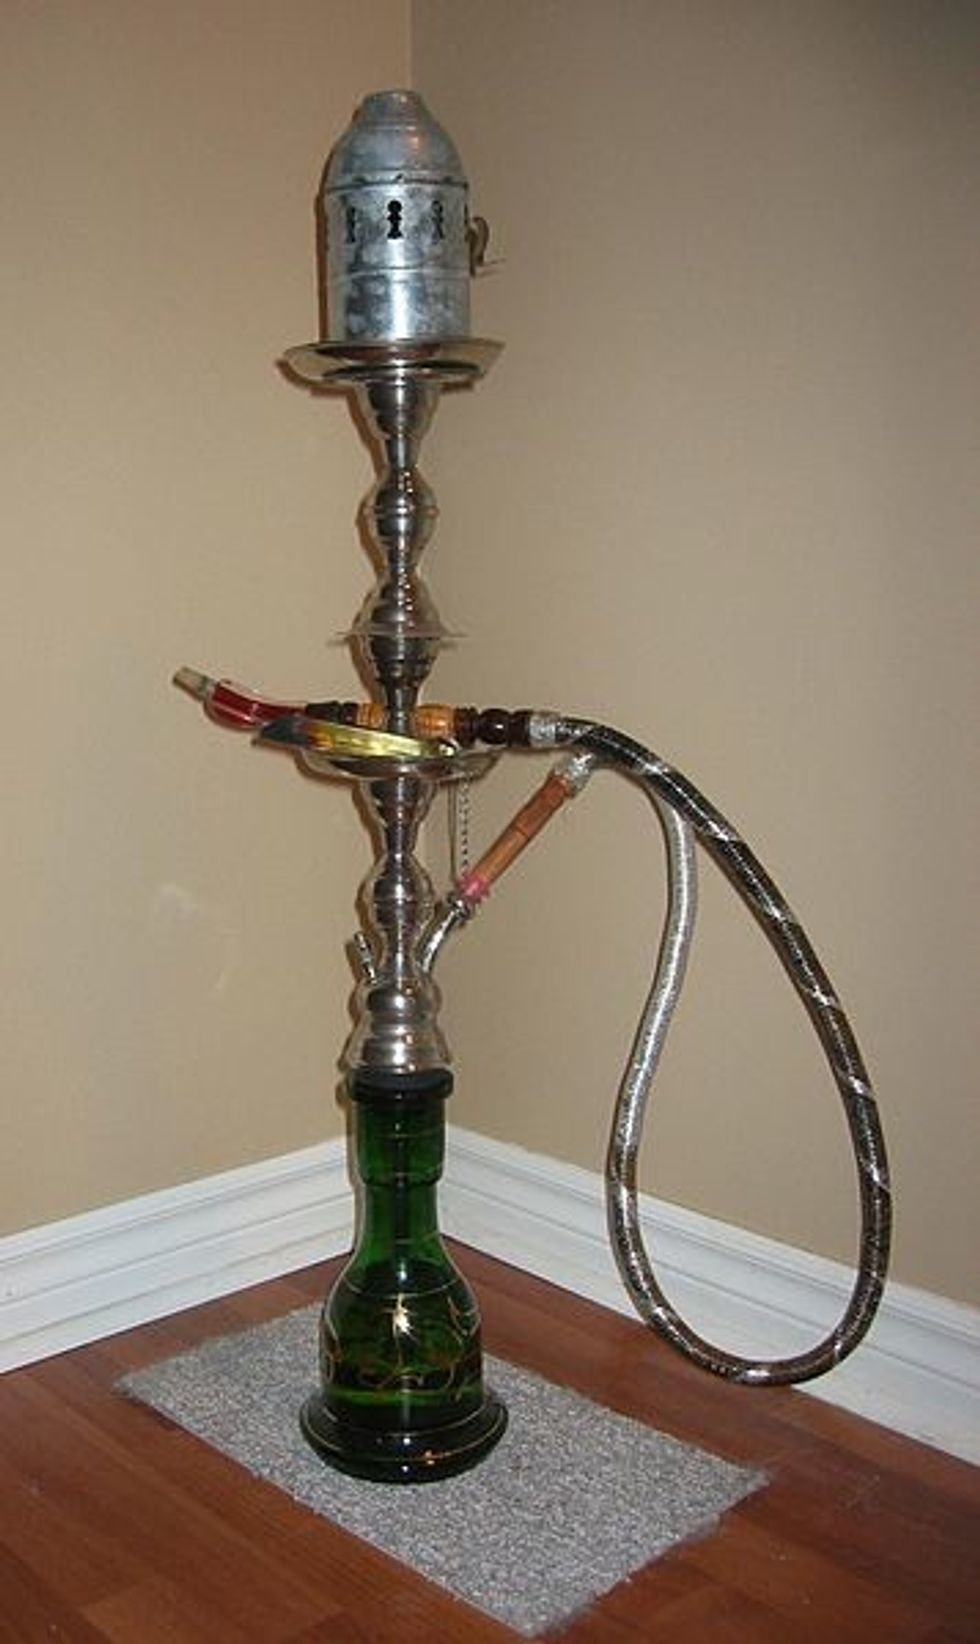 Hookah Use Increasing Dramatically Among Teens, Study Finds